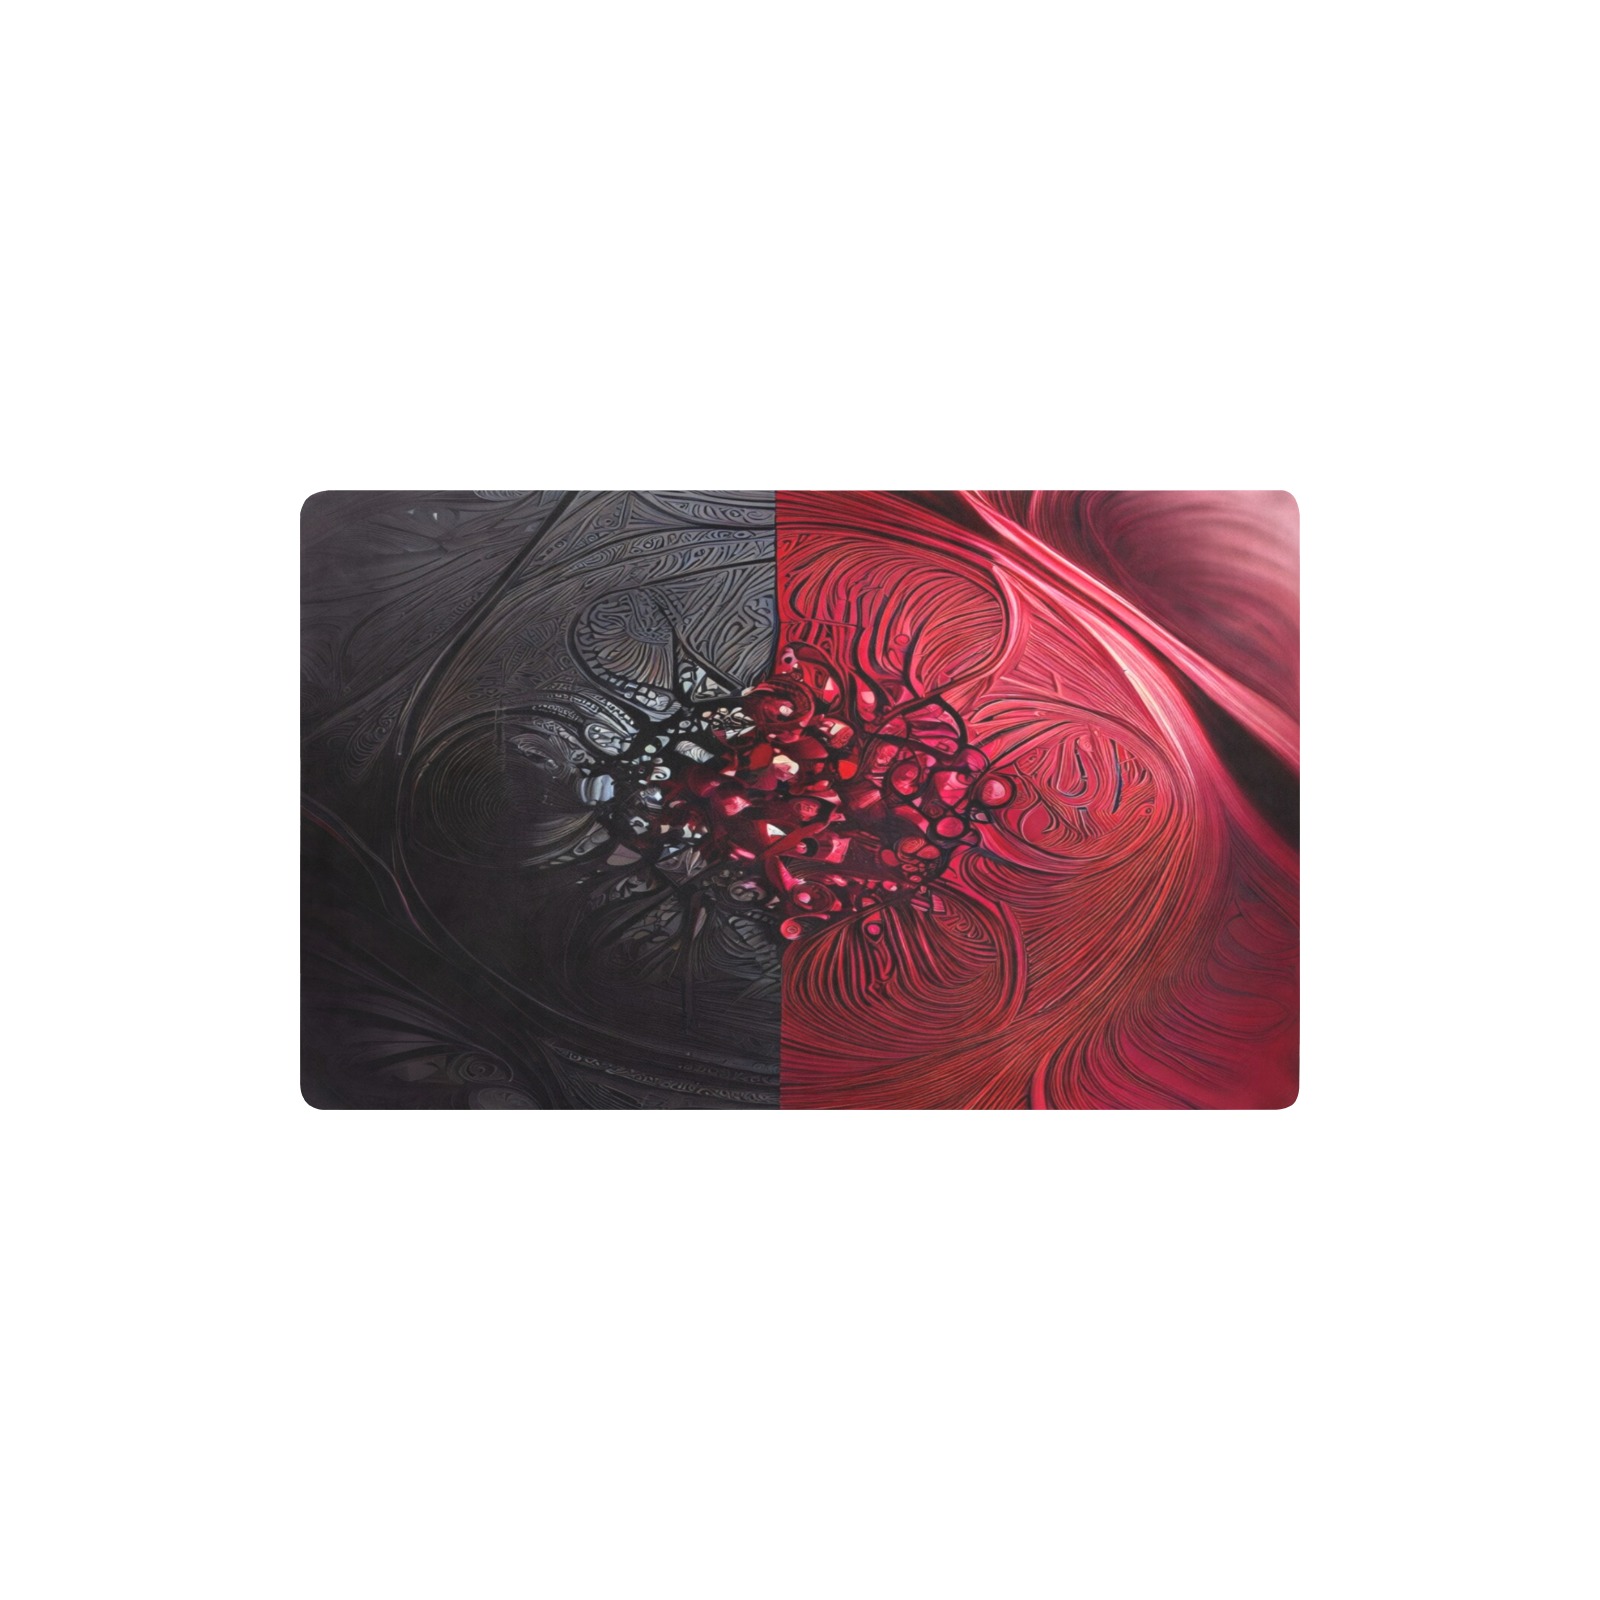 red and black shield Kitchen Mat 32"x20"